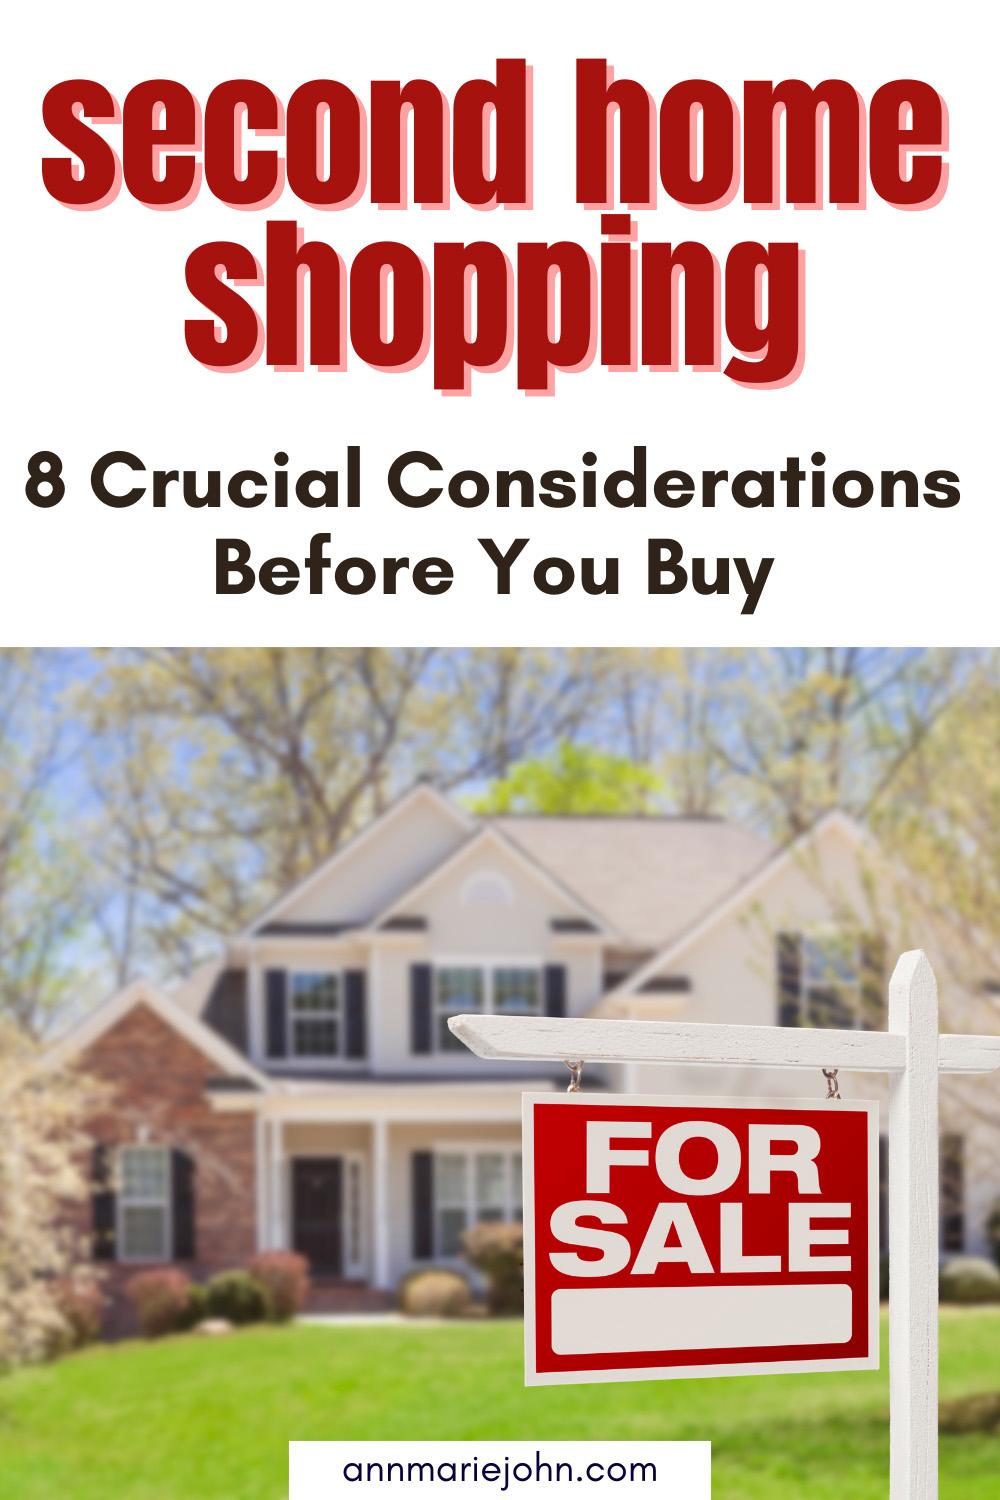 Second Home Shopping: 8 Crucial Considerations Before You Buy